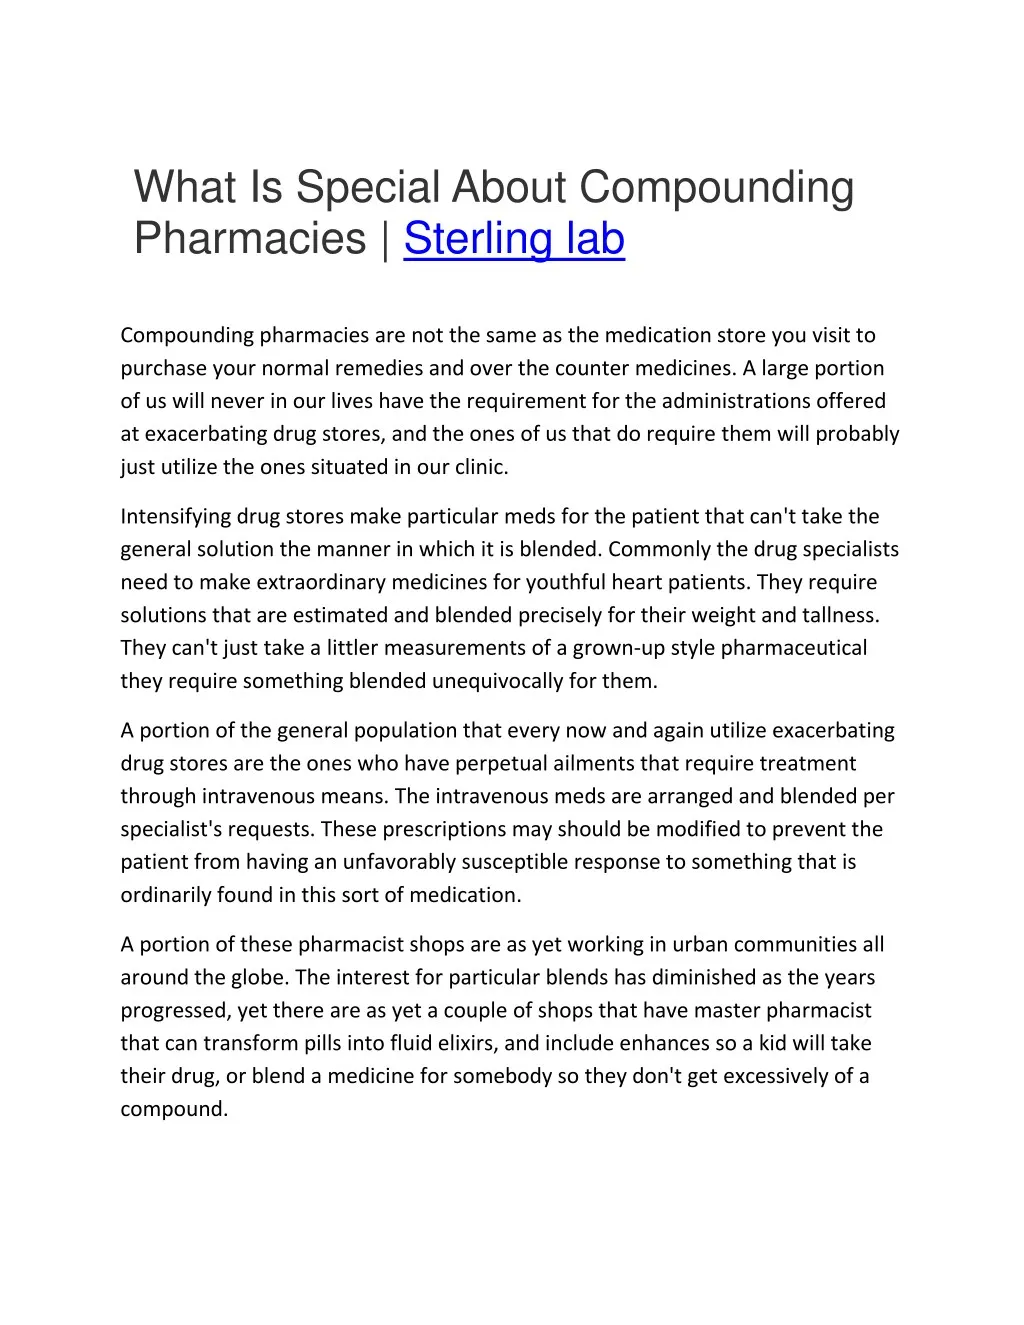 what is special about compounding pharmacies